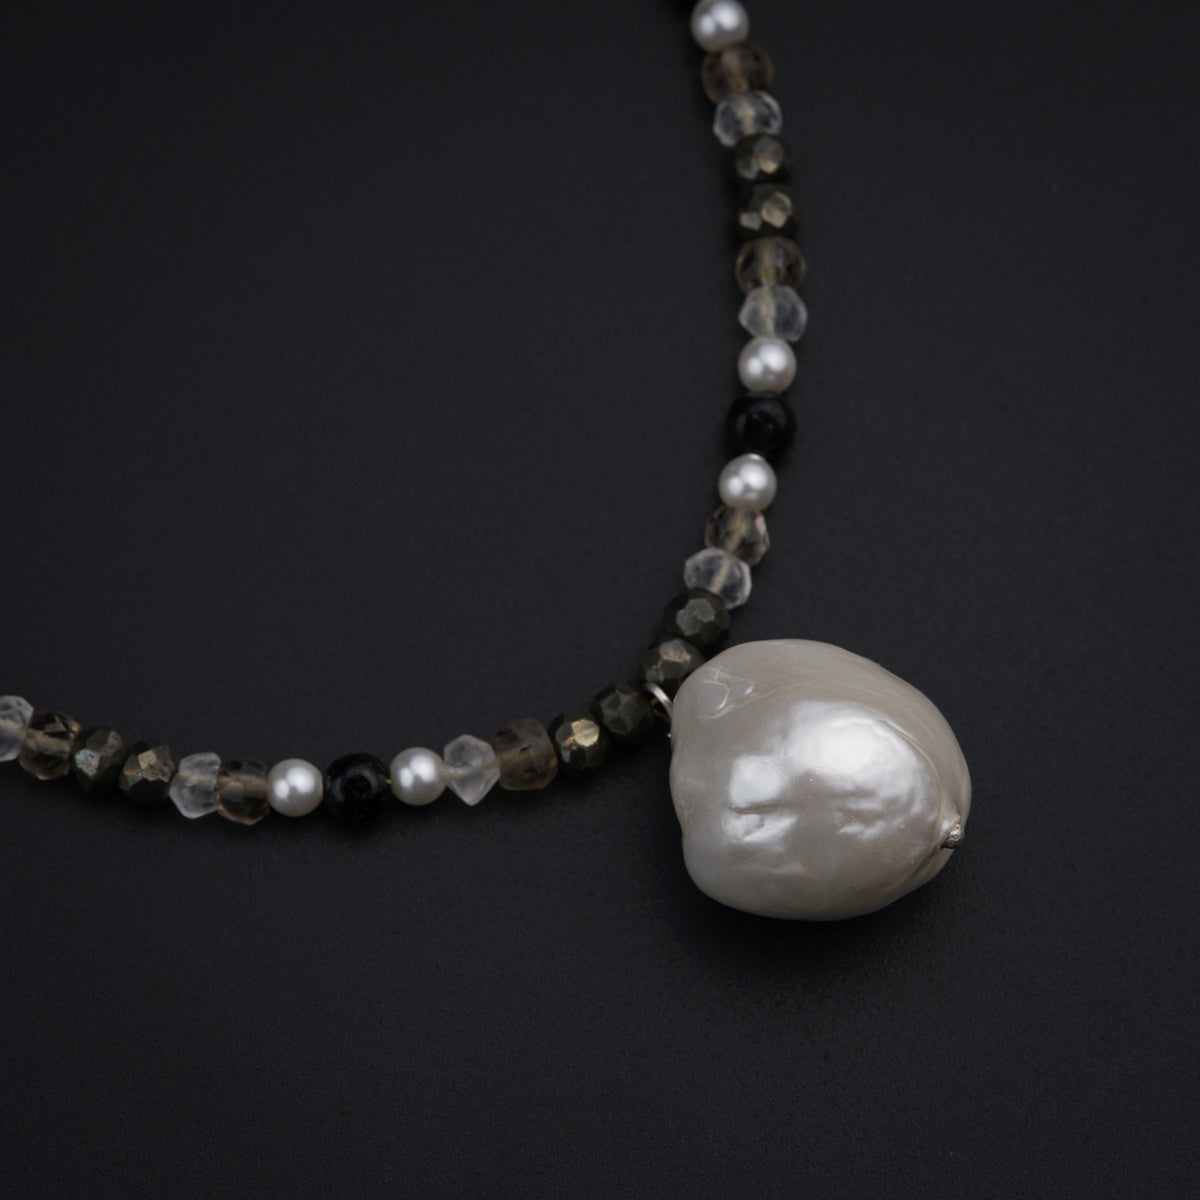 a necklace with a white pearl and black beads